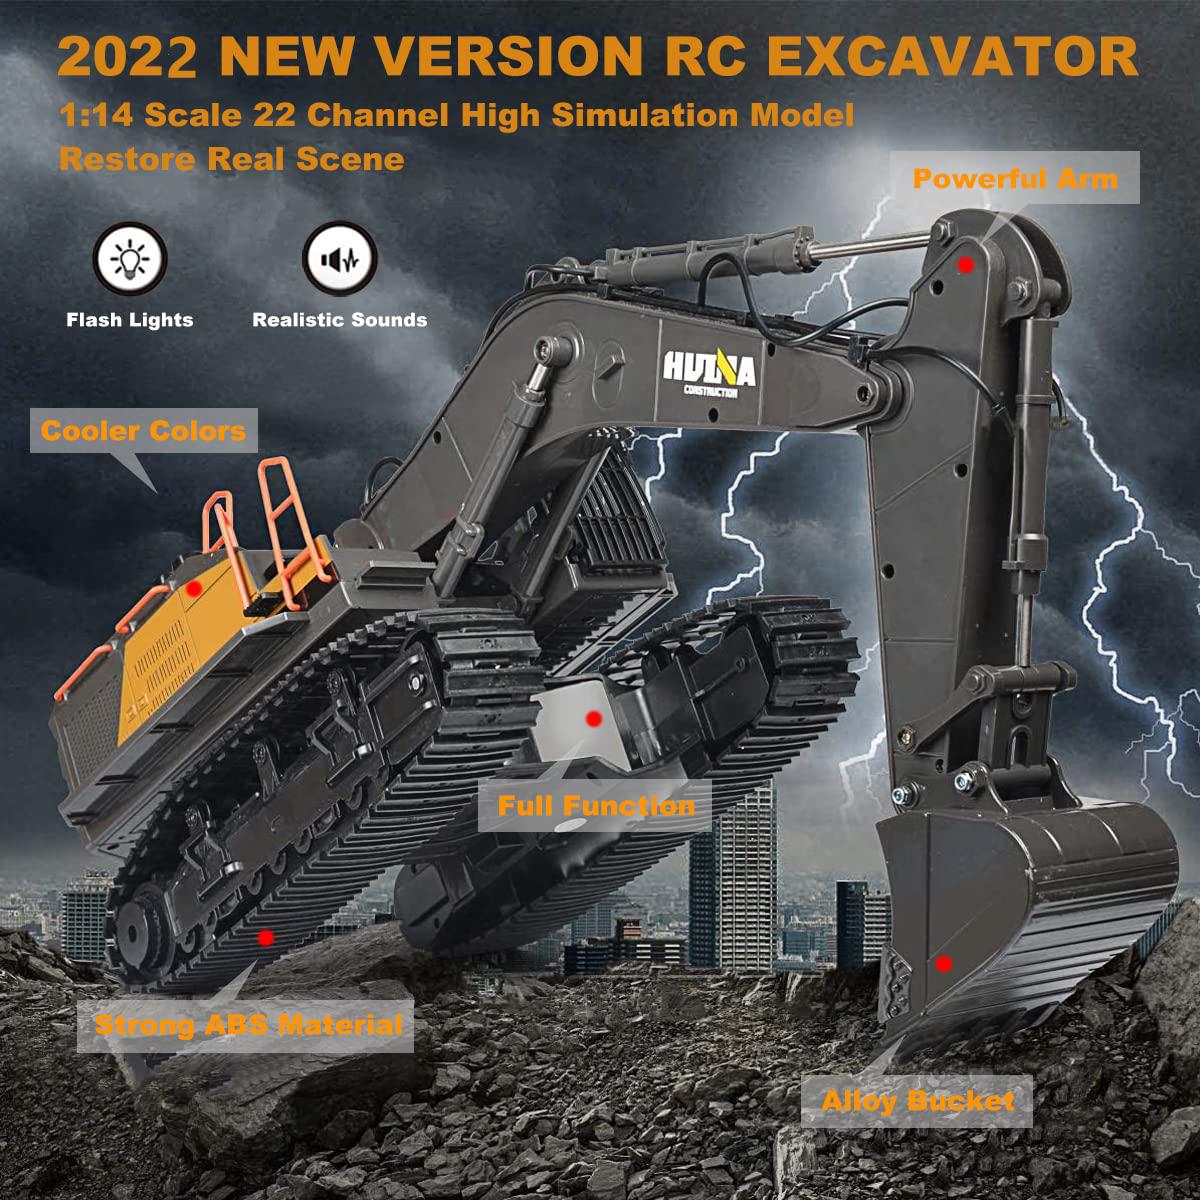 bnam remote control excavator toy 1/14 scale rc excavator, 22 channel upgrade full functional construction vehicles rechargea